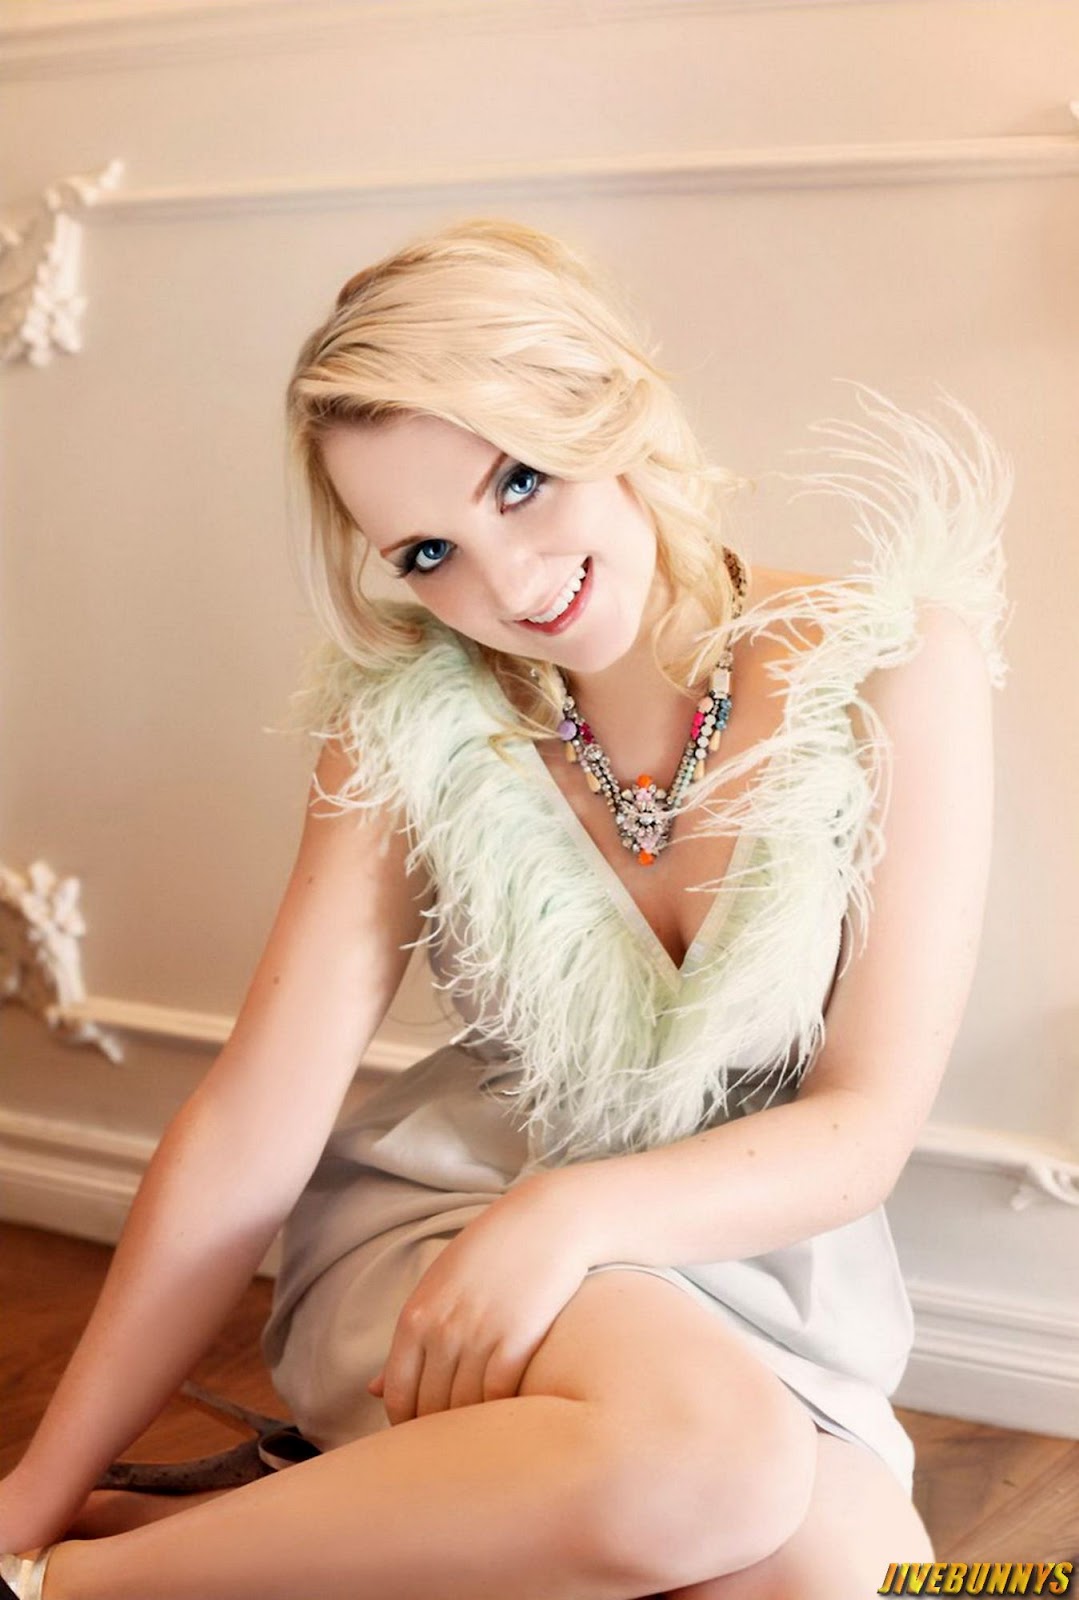 Evanna Lynch – Thoroughly Underrated? | Everyone Loves To Star Gaze